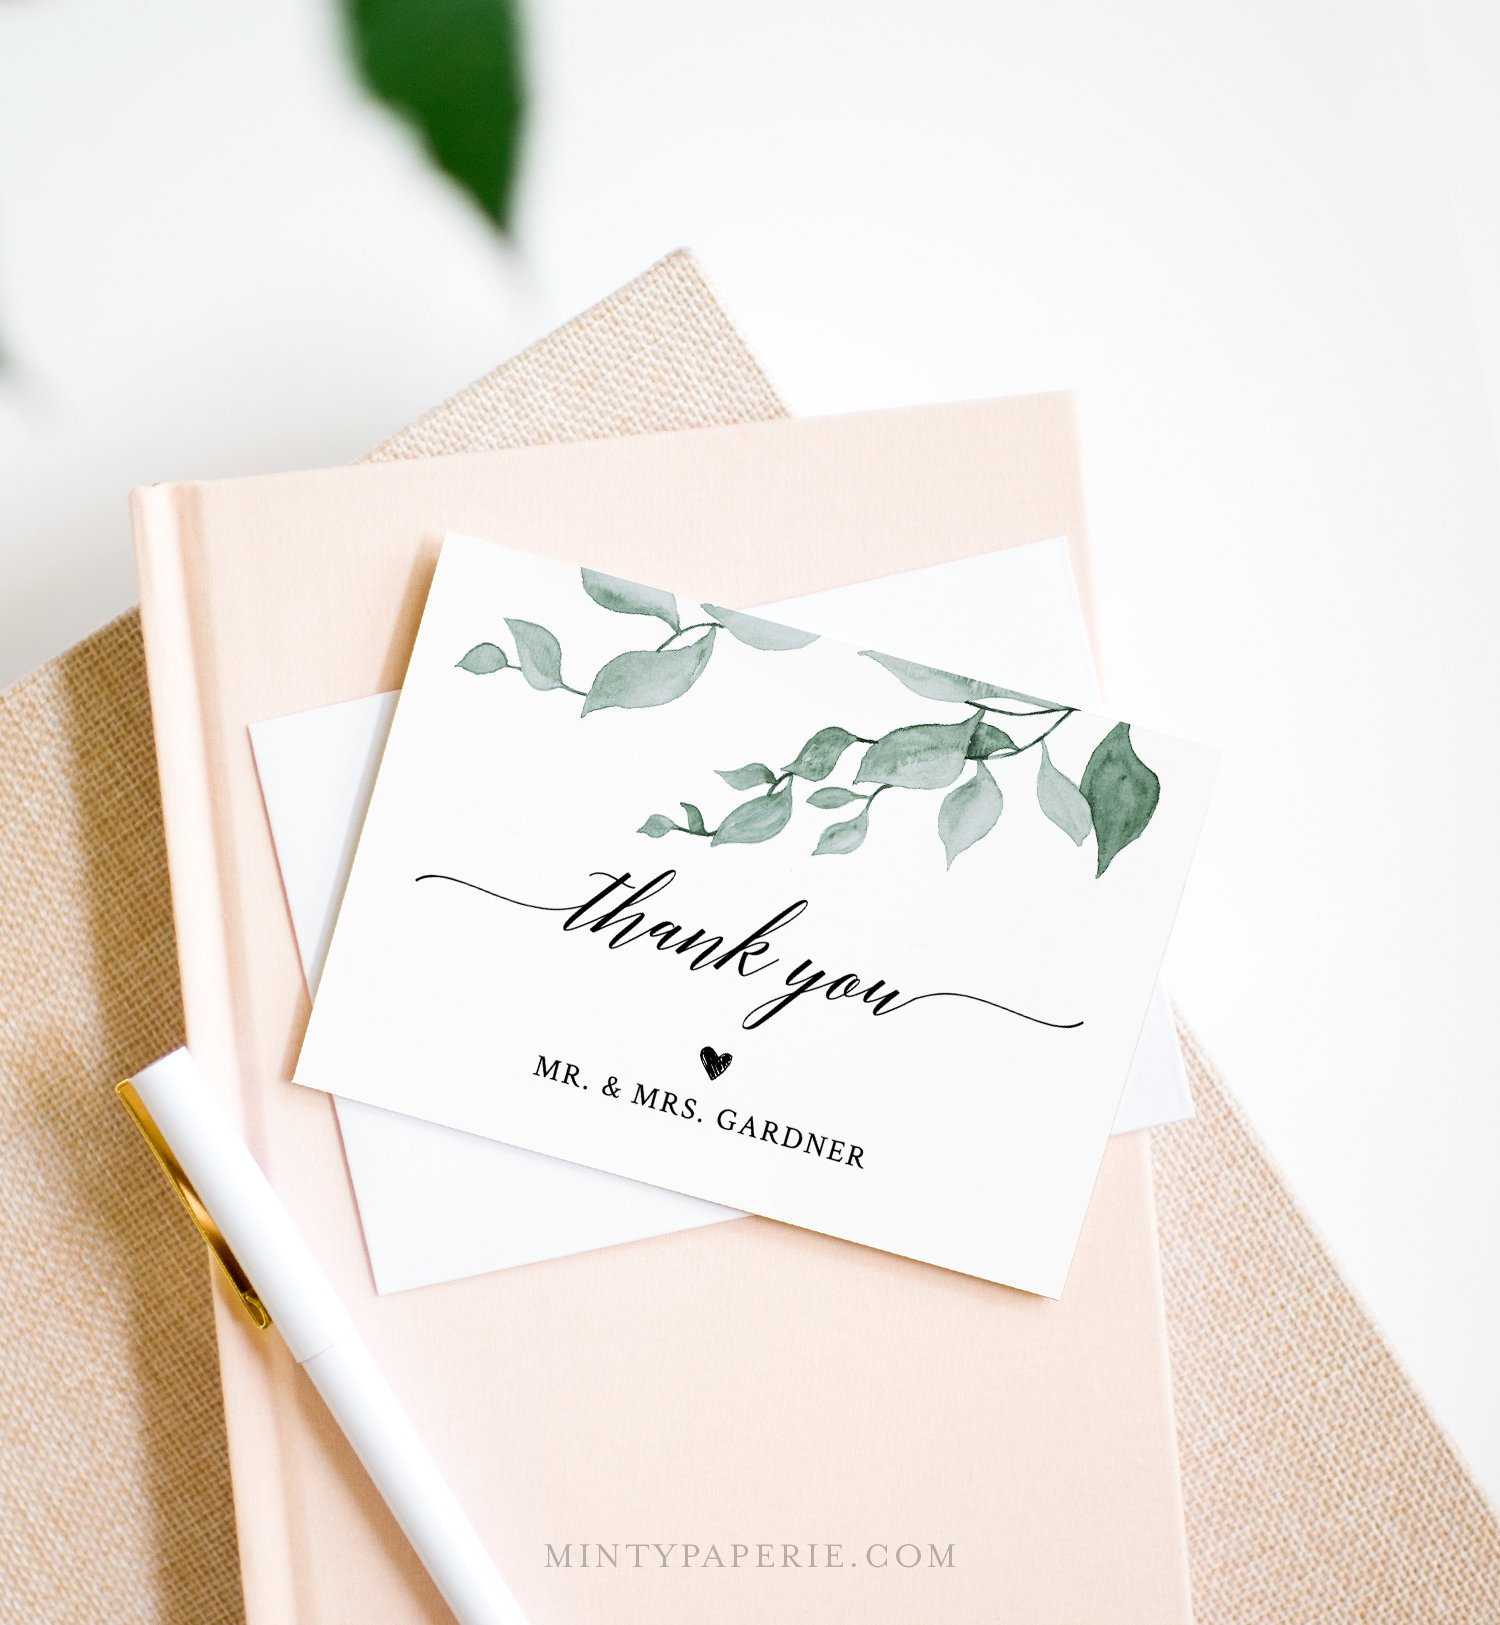 Greenery Thank You Note Card Template, Folded Wedding Or In Thank You Note Cards Template